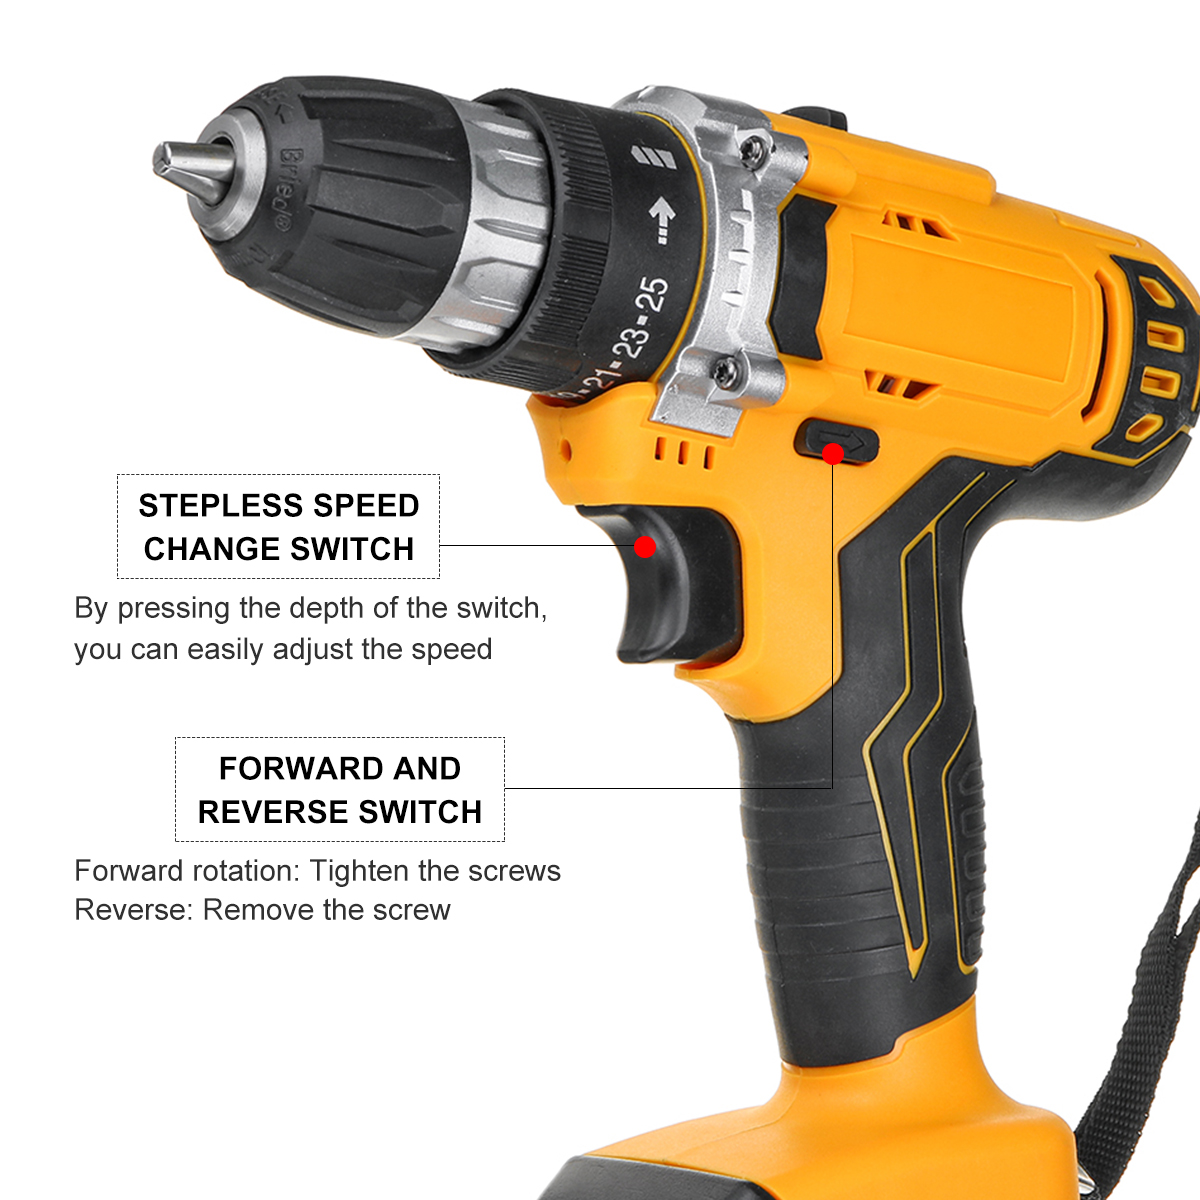 121821V-251-Torque-2-Speed-Cordless-Electric-Drill-Screwdriver-W-LED-Light-1733758-3